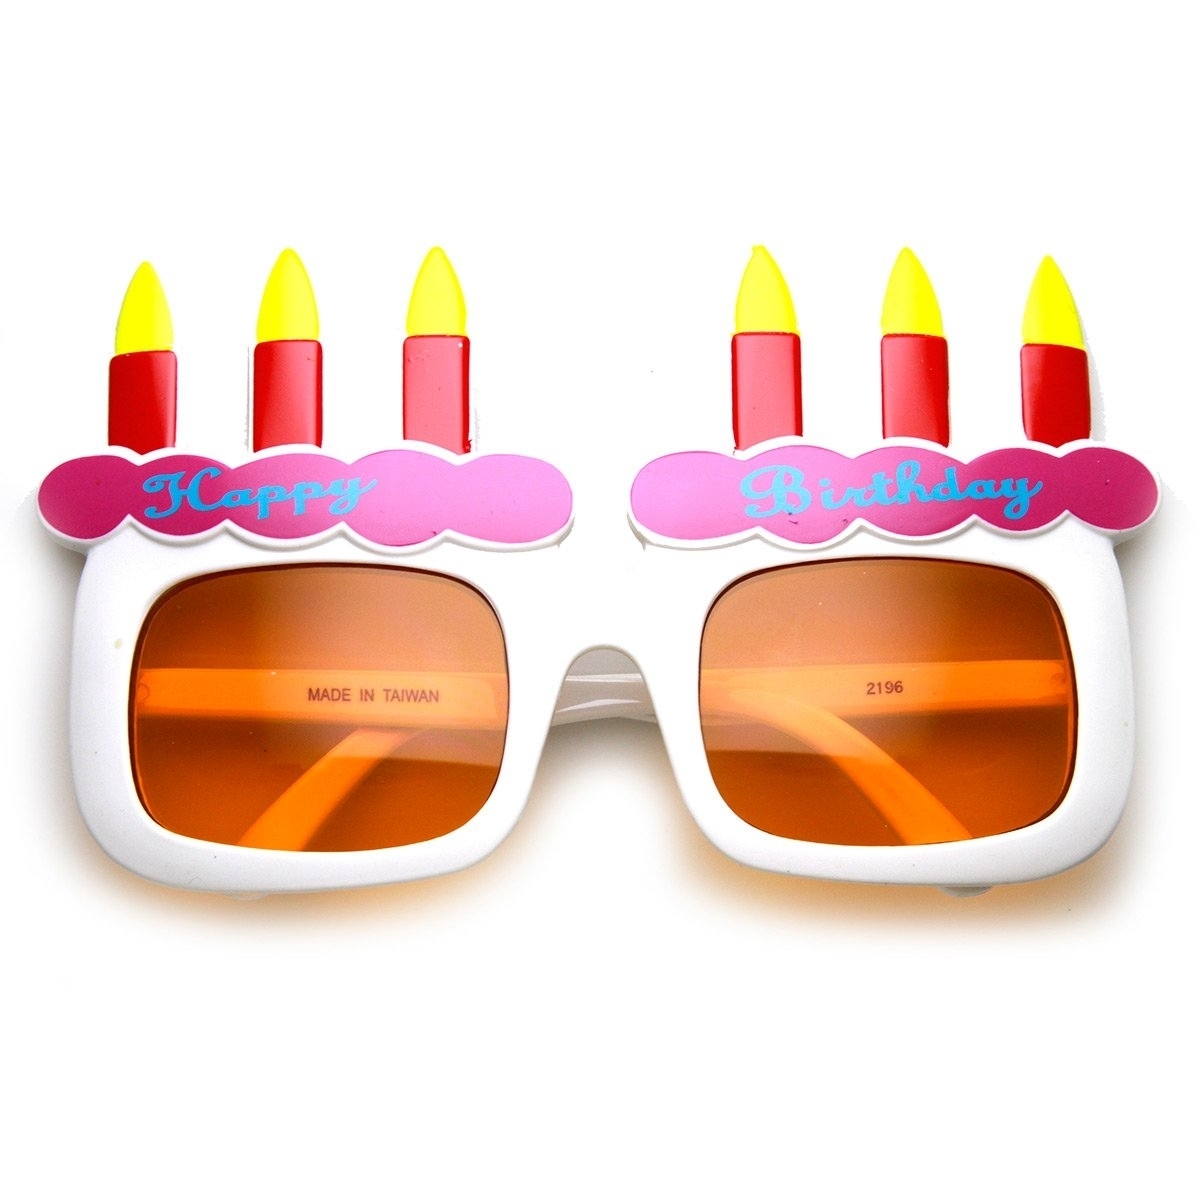 Happy Birthday Cake And Candles Party Favor Celebration Sunglasses - Brown Brown